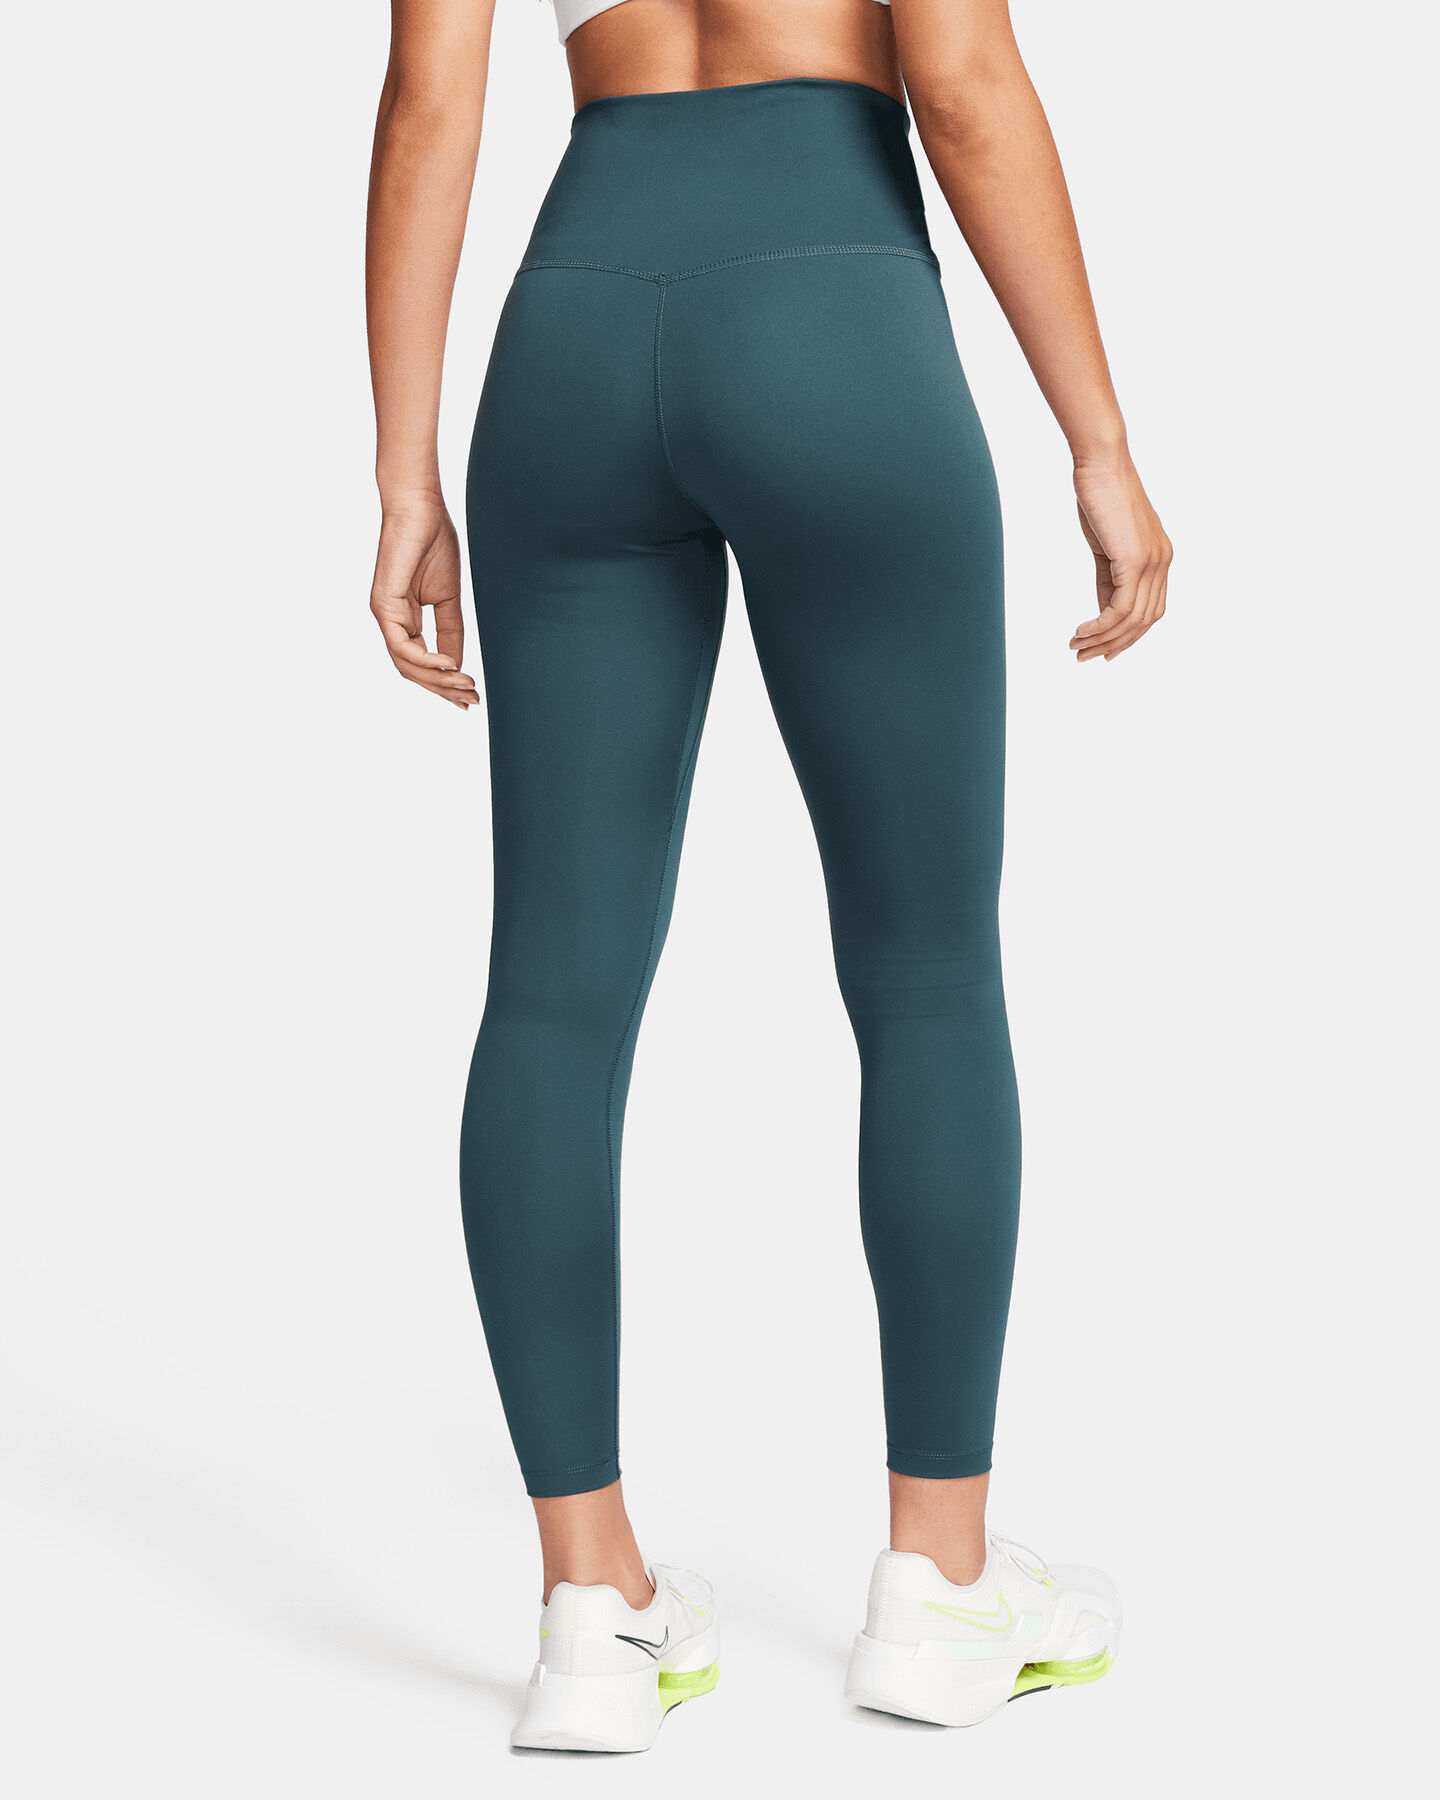  Leggings NIKE ONE HIGH RISE W S5627341|328|XS scatto 1